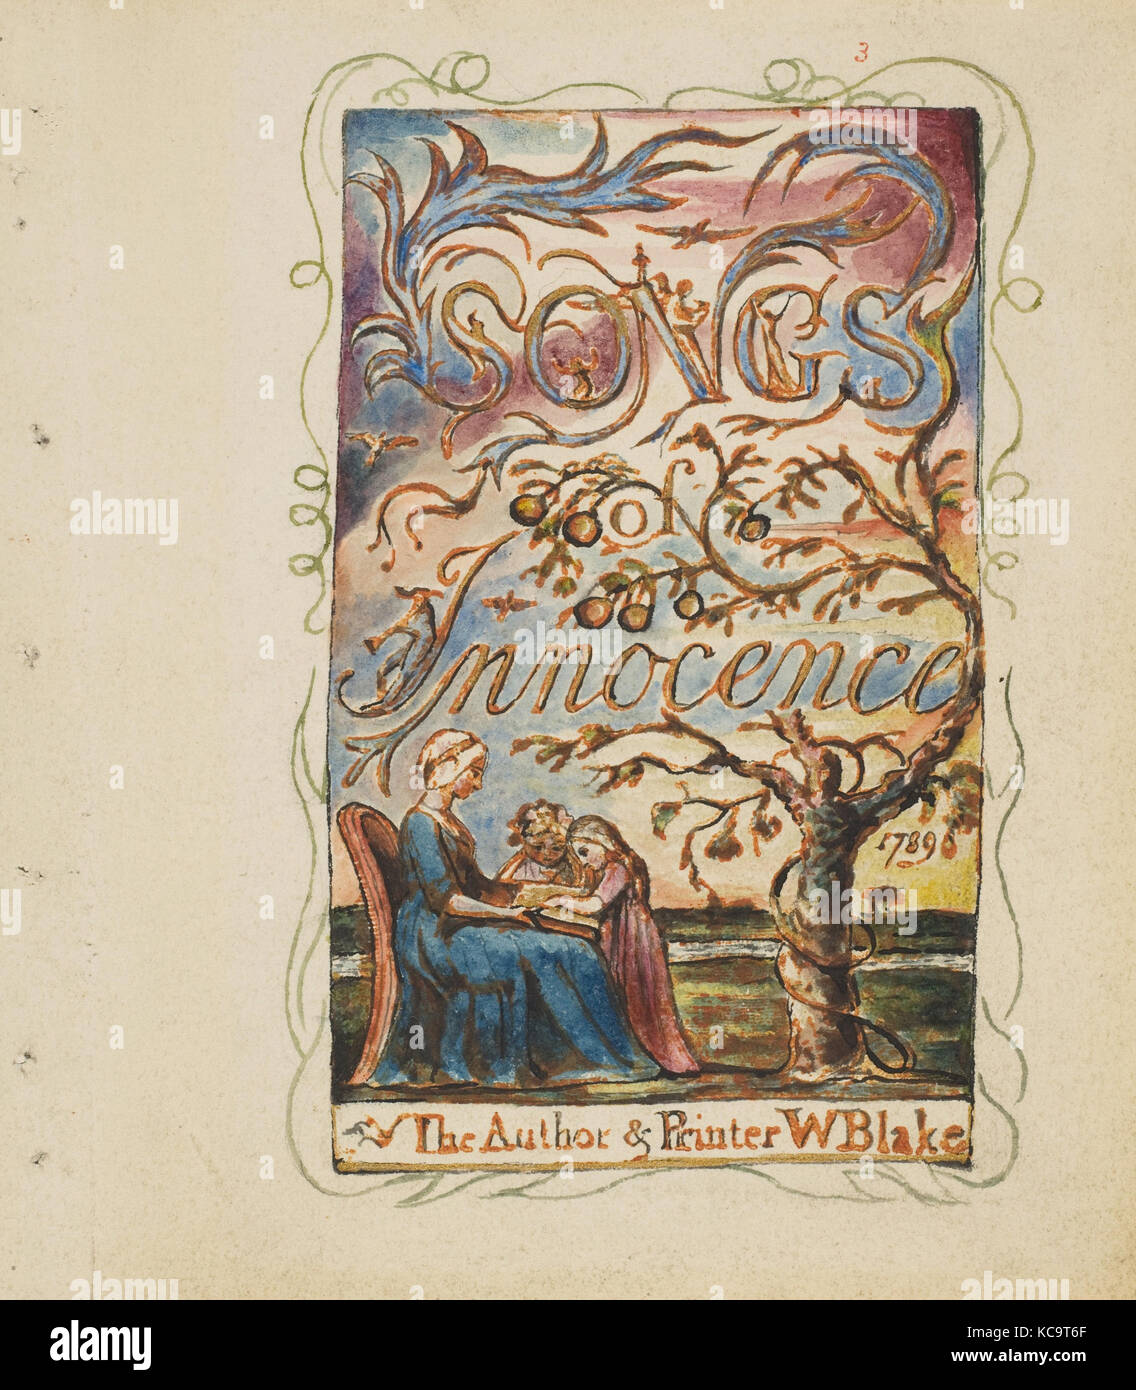 Songs of Innocence: Title Page, William Blake, ca. 1825 Stock Photo